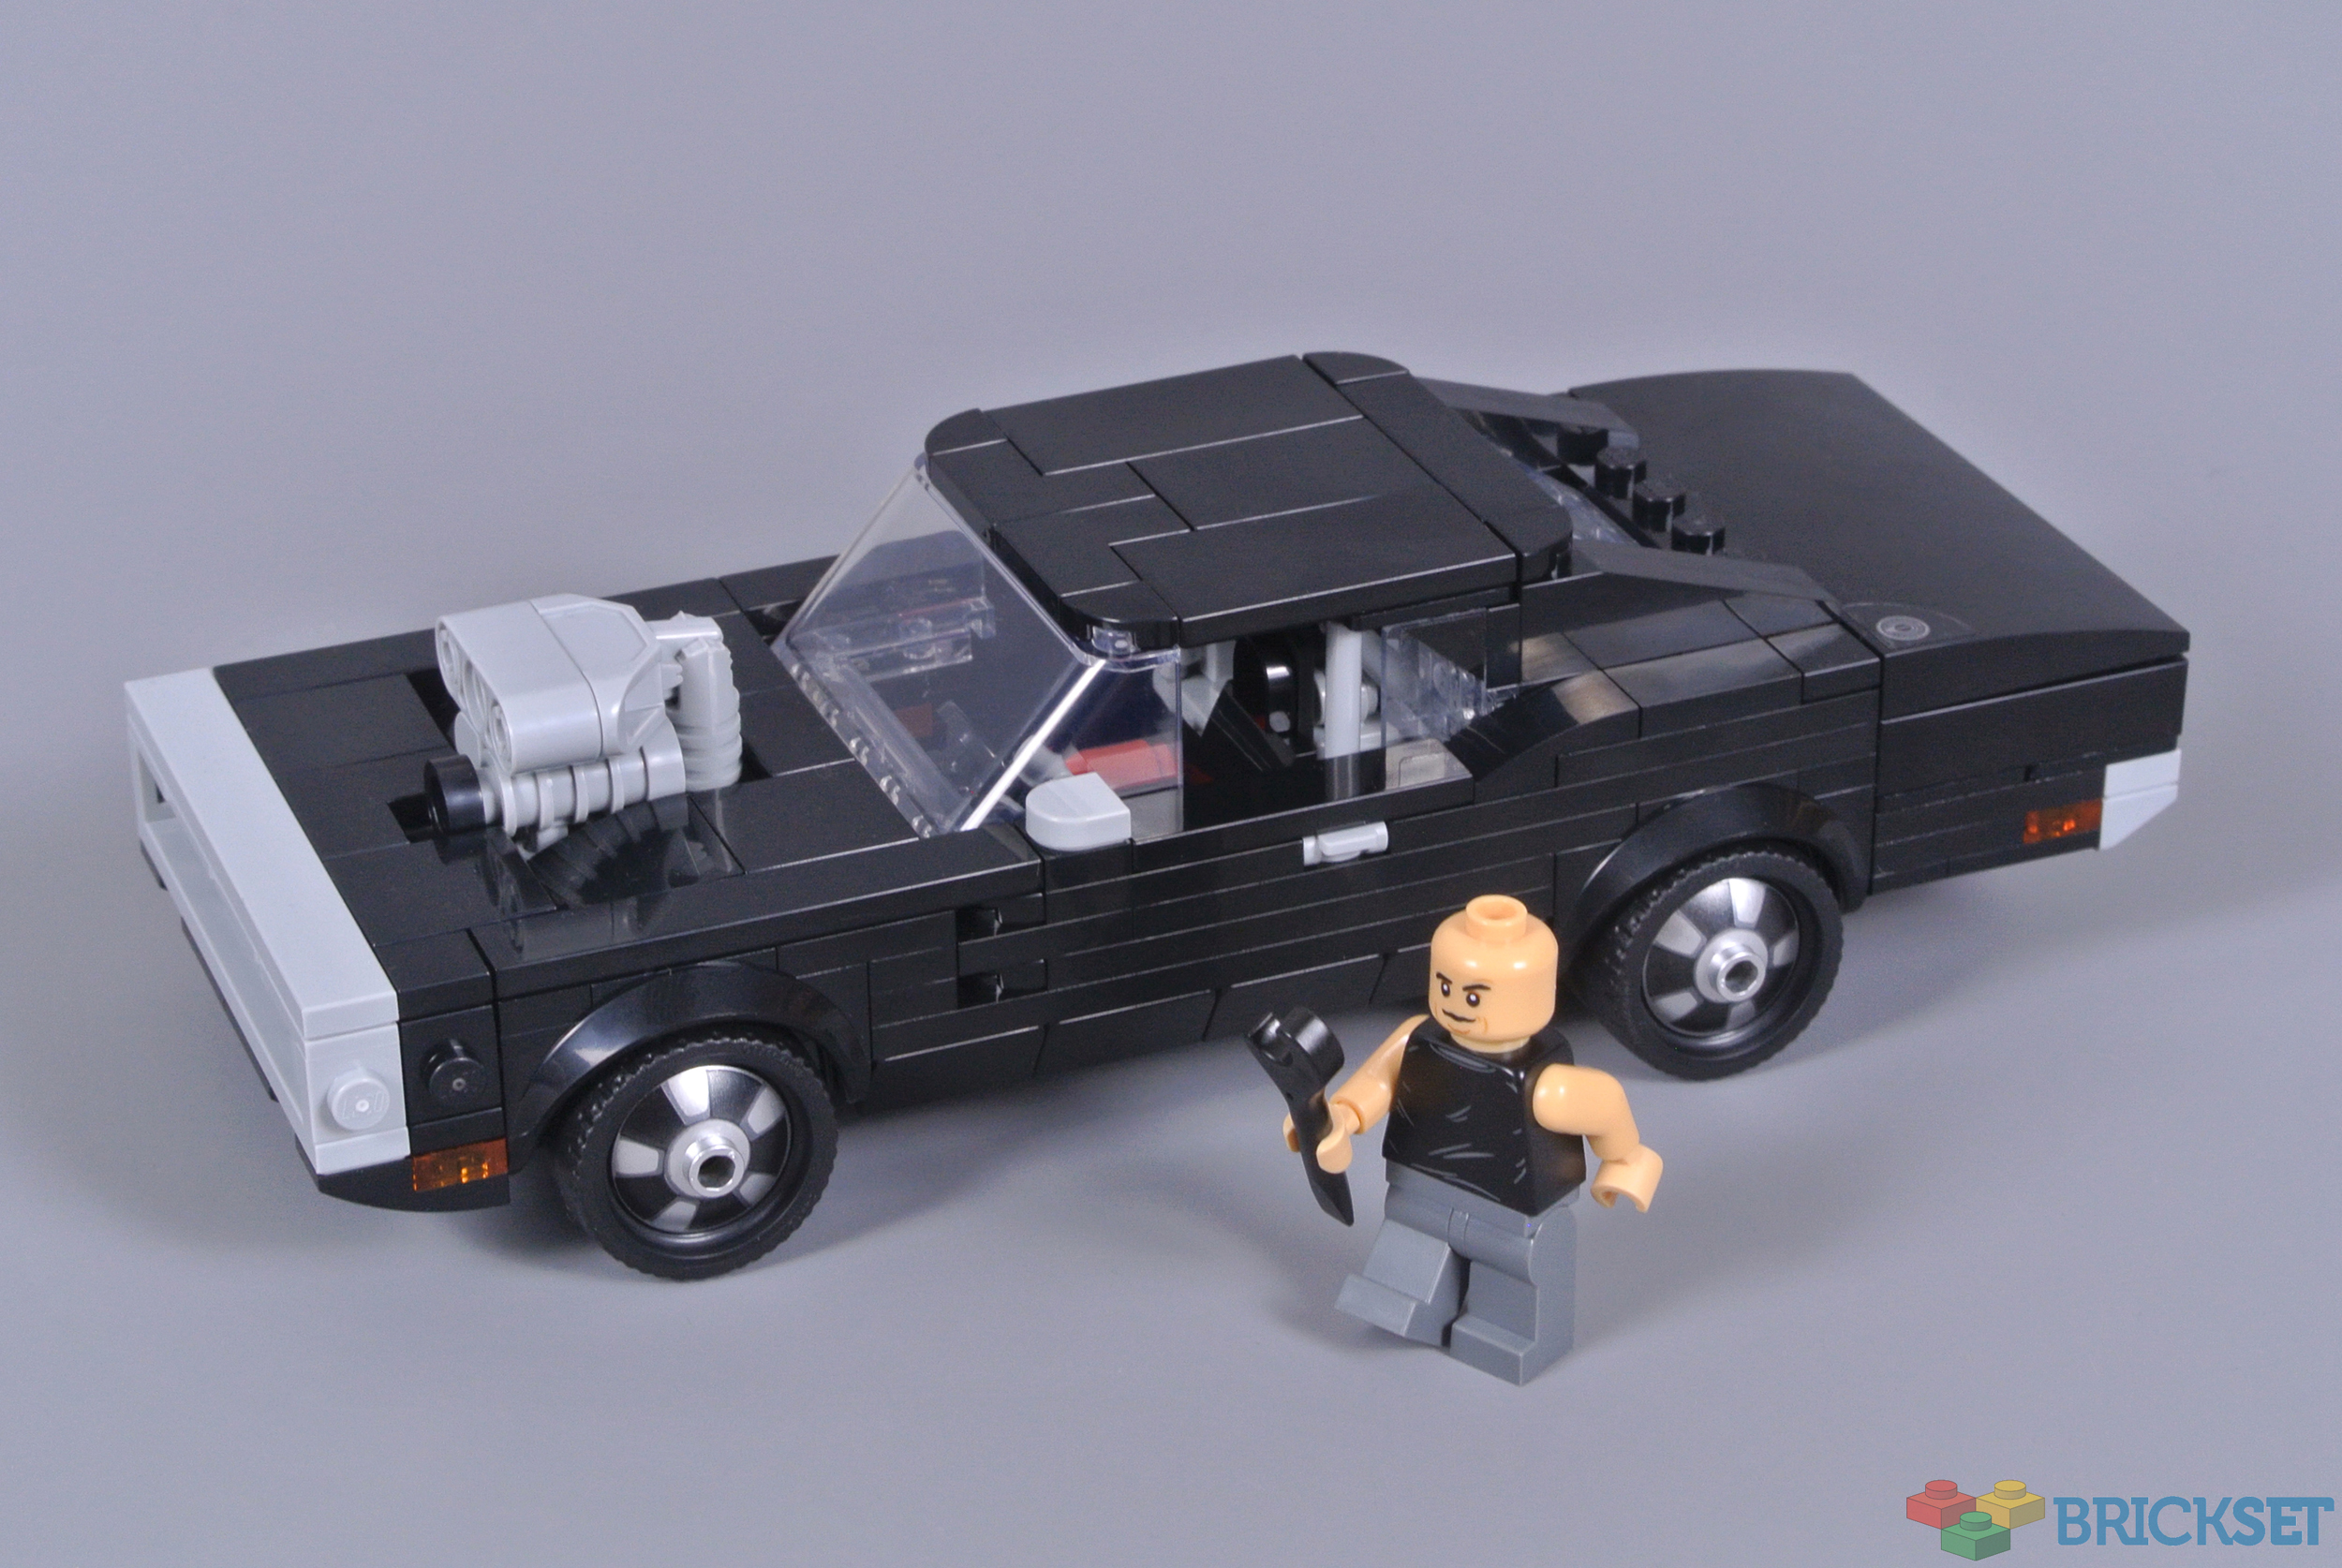 LEGO 76912 Fast & Furious 1970 Dodge Charger R/T review